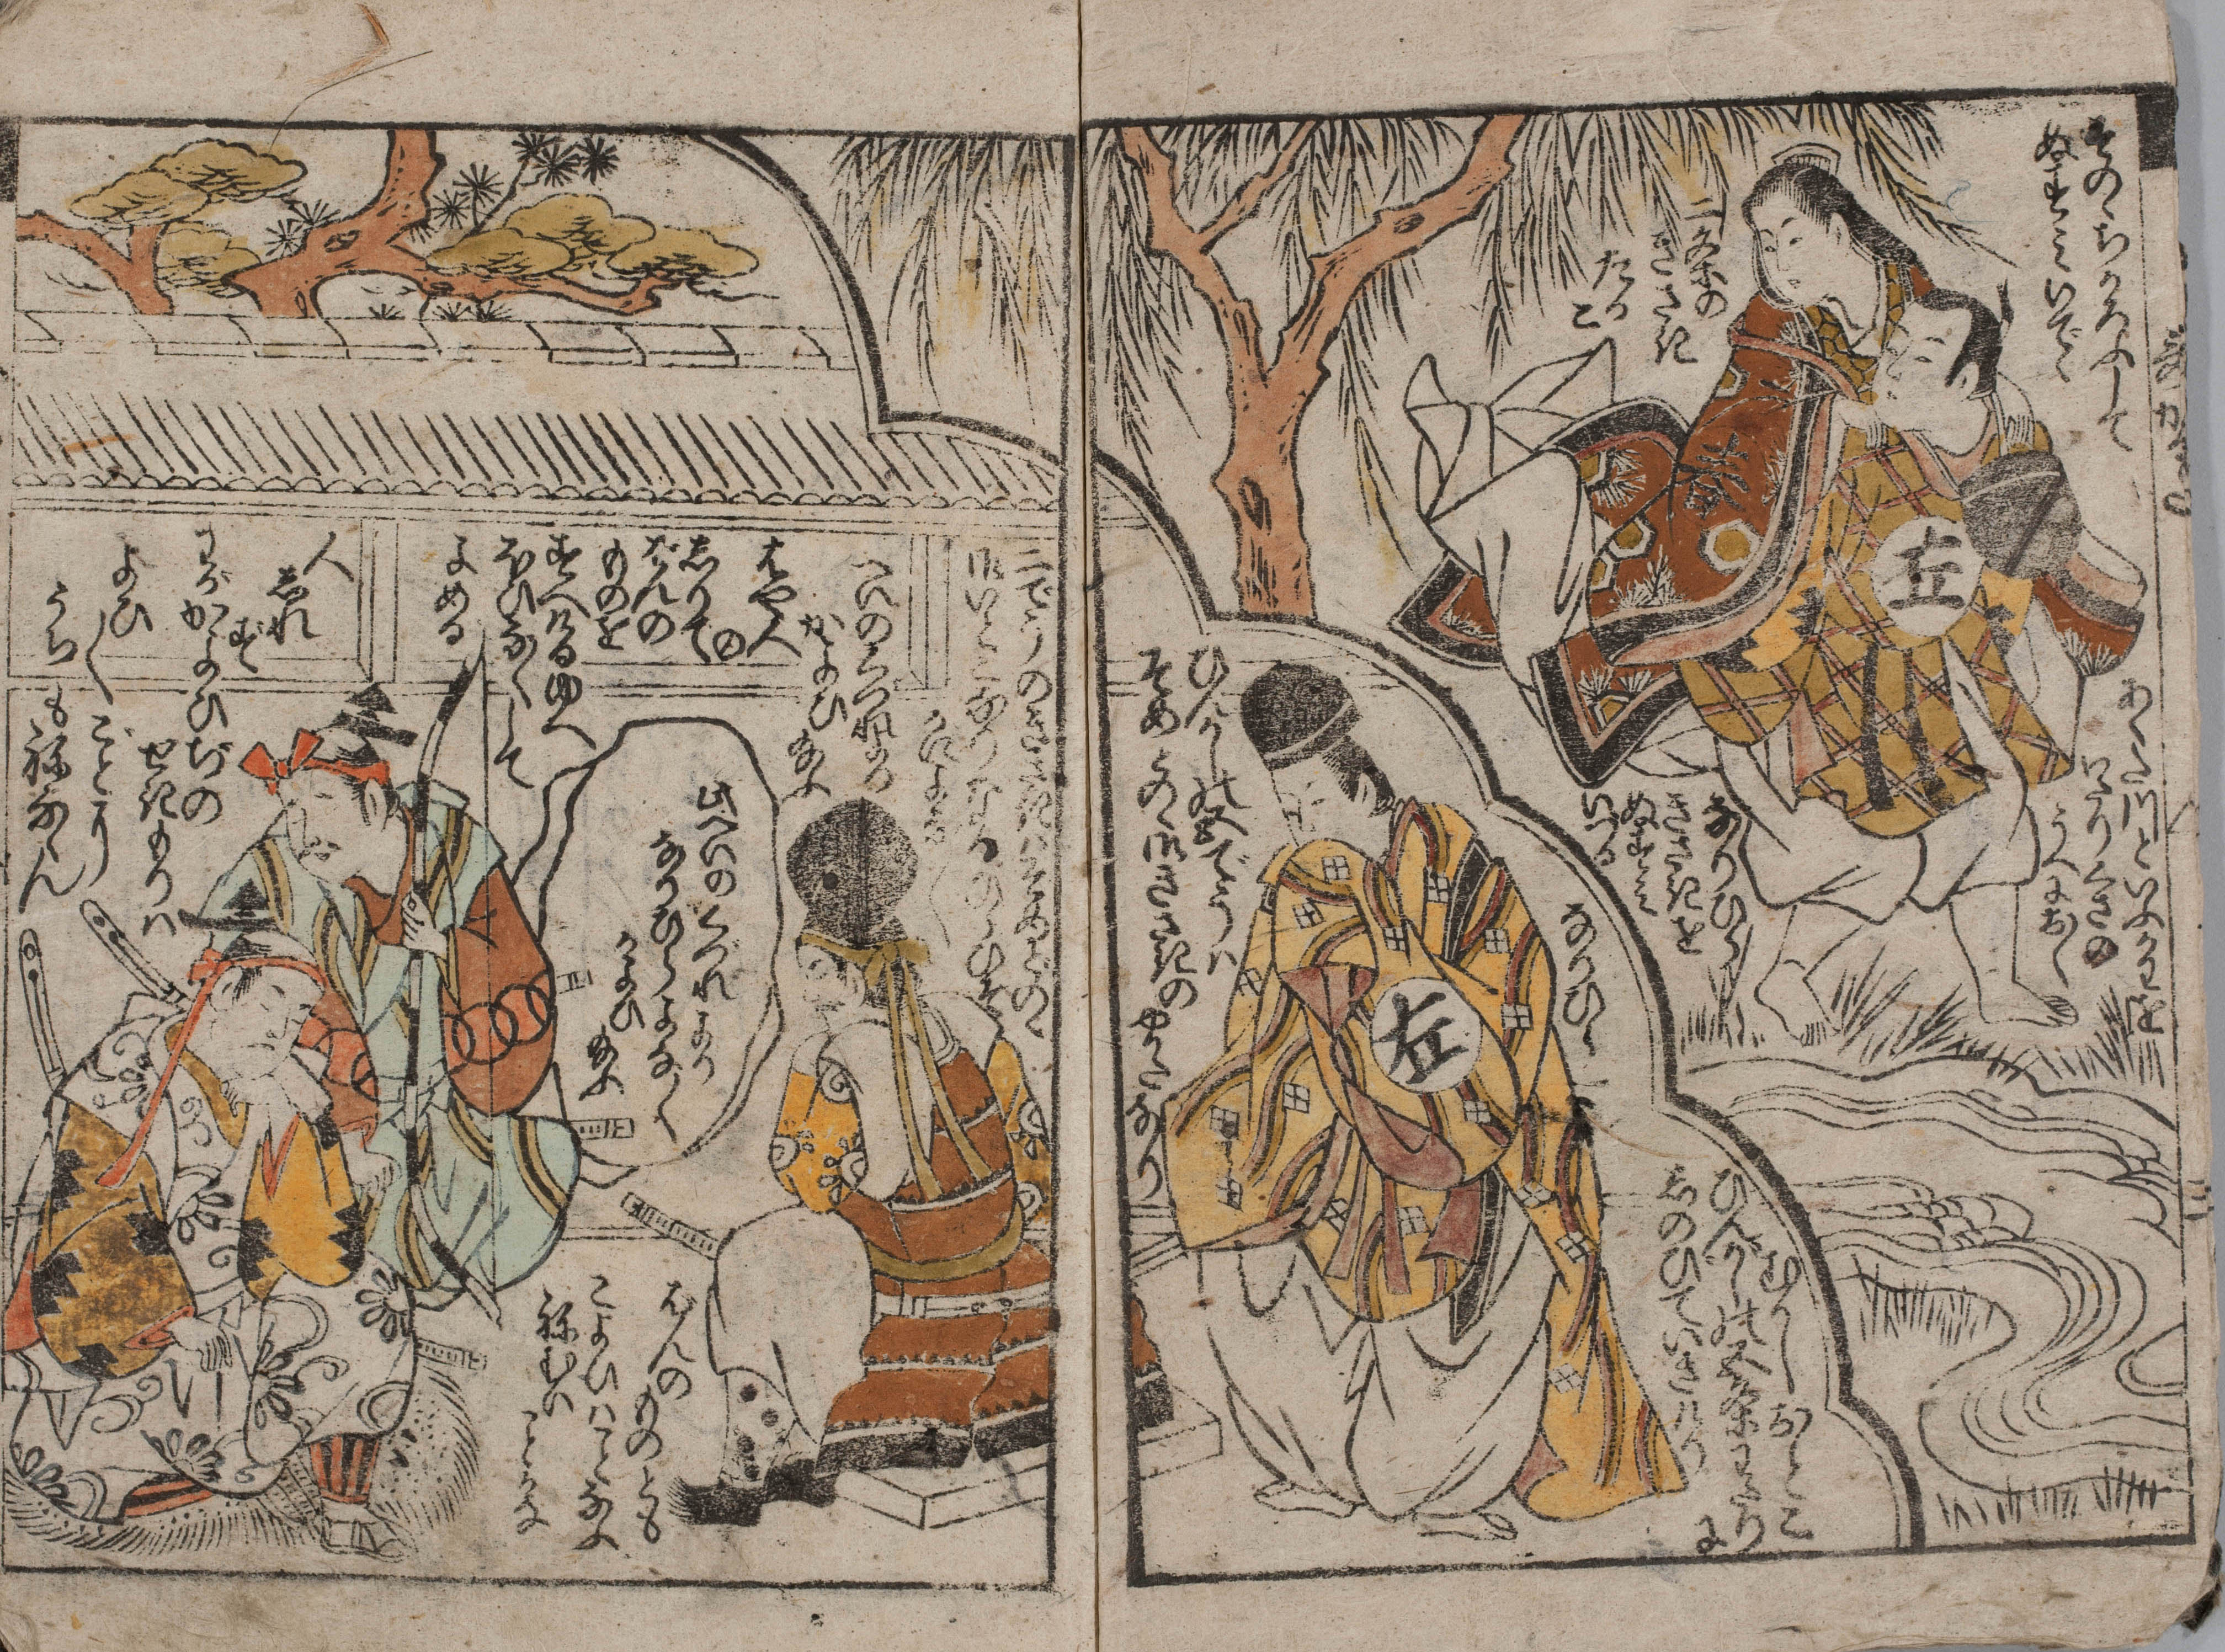 Earliest-known children’s adaptation of Japanese literary classic